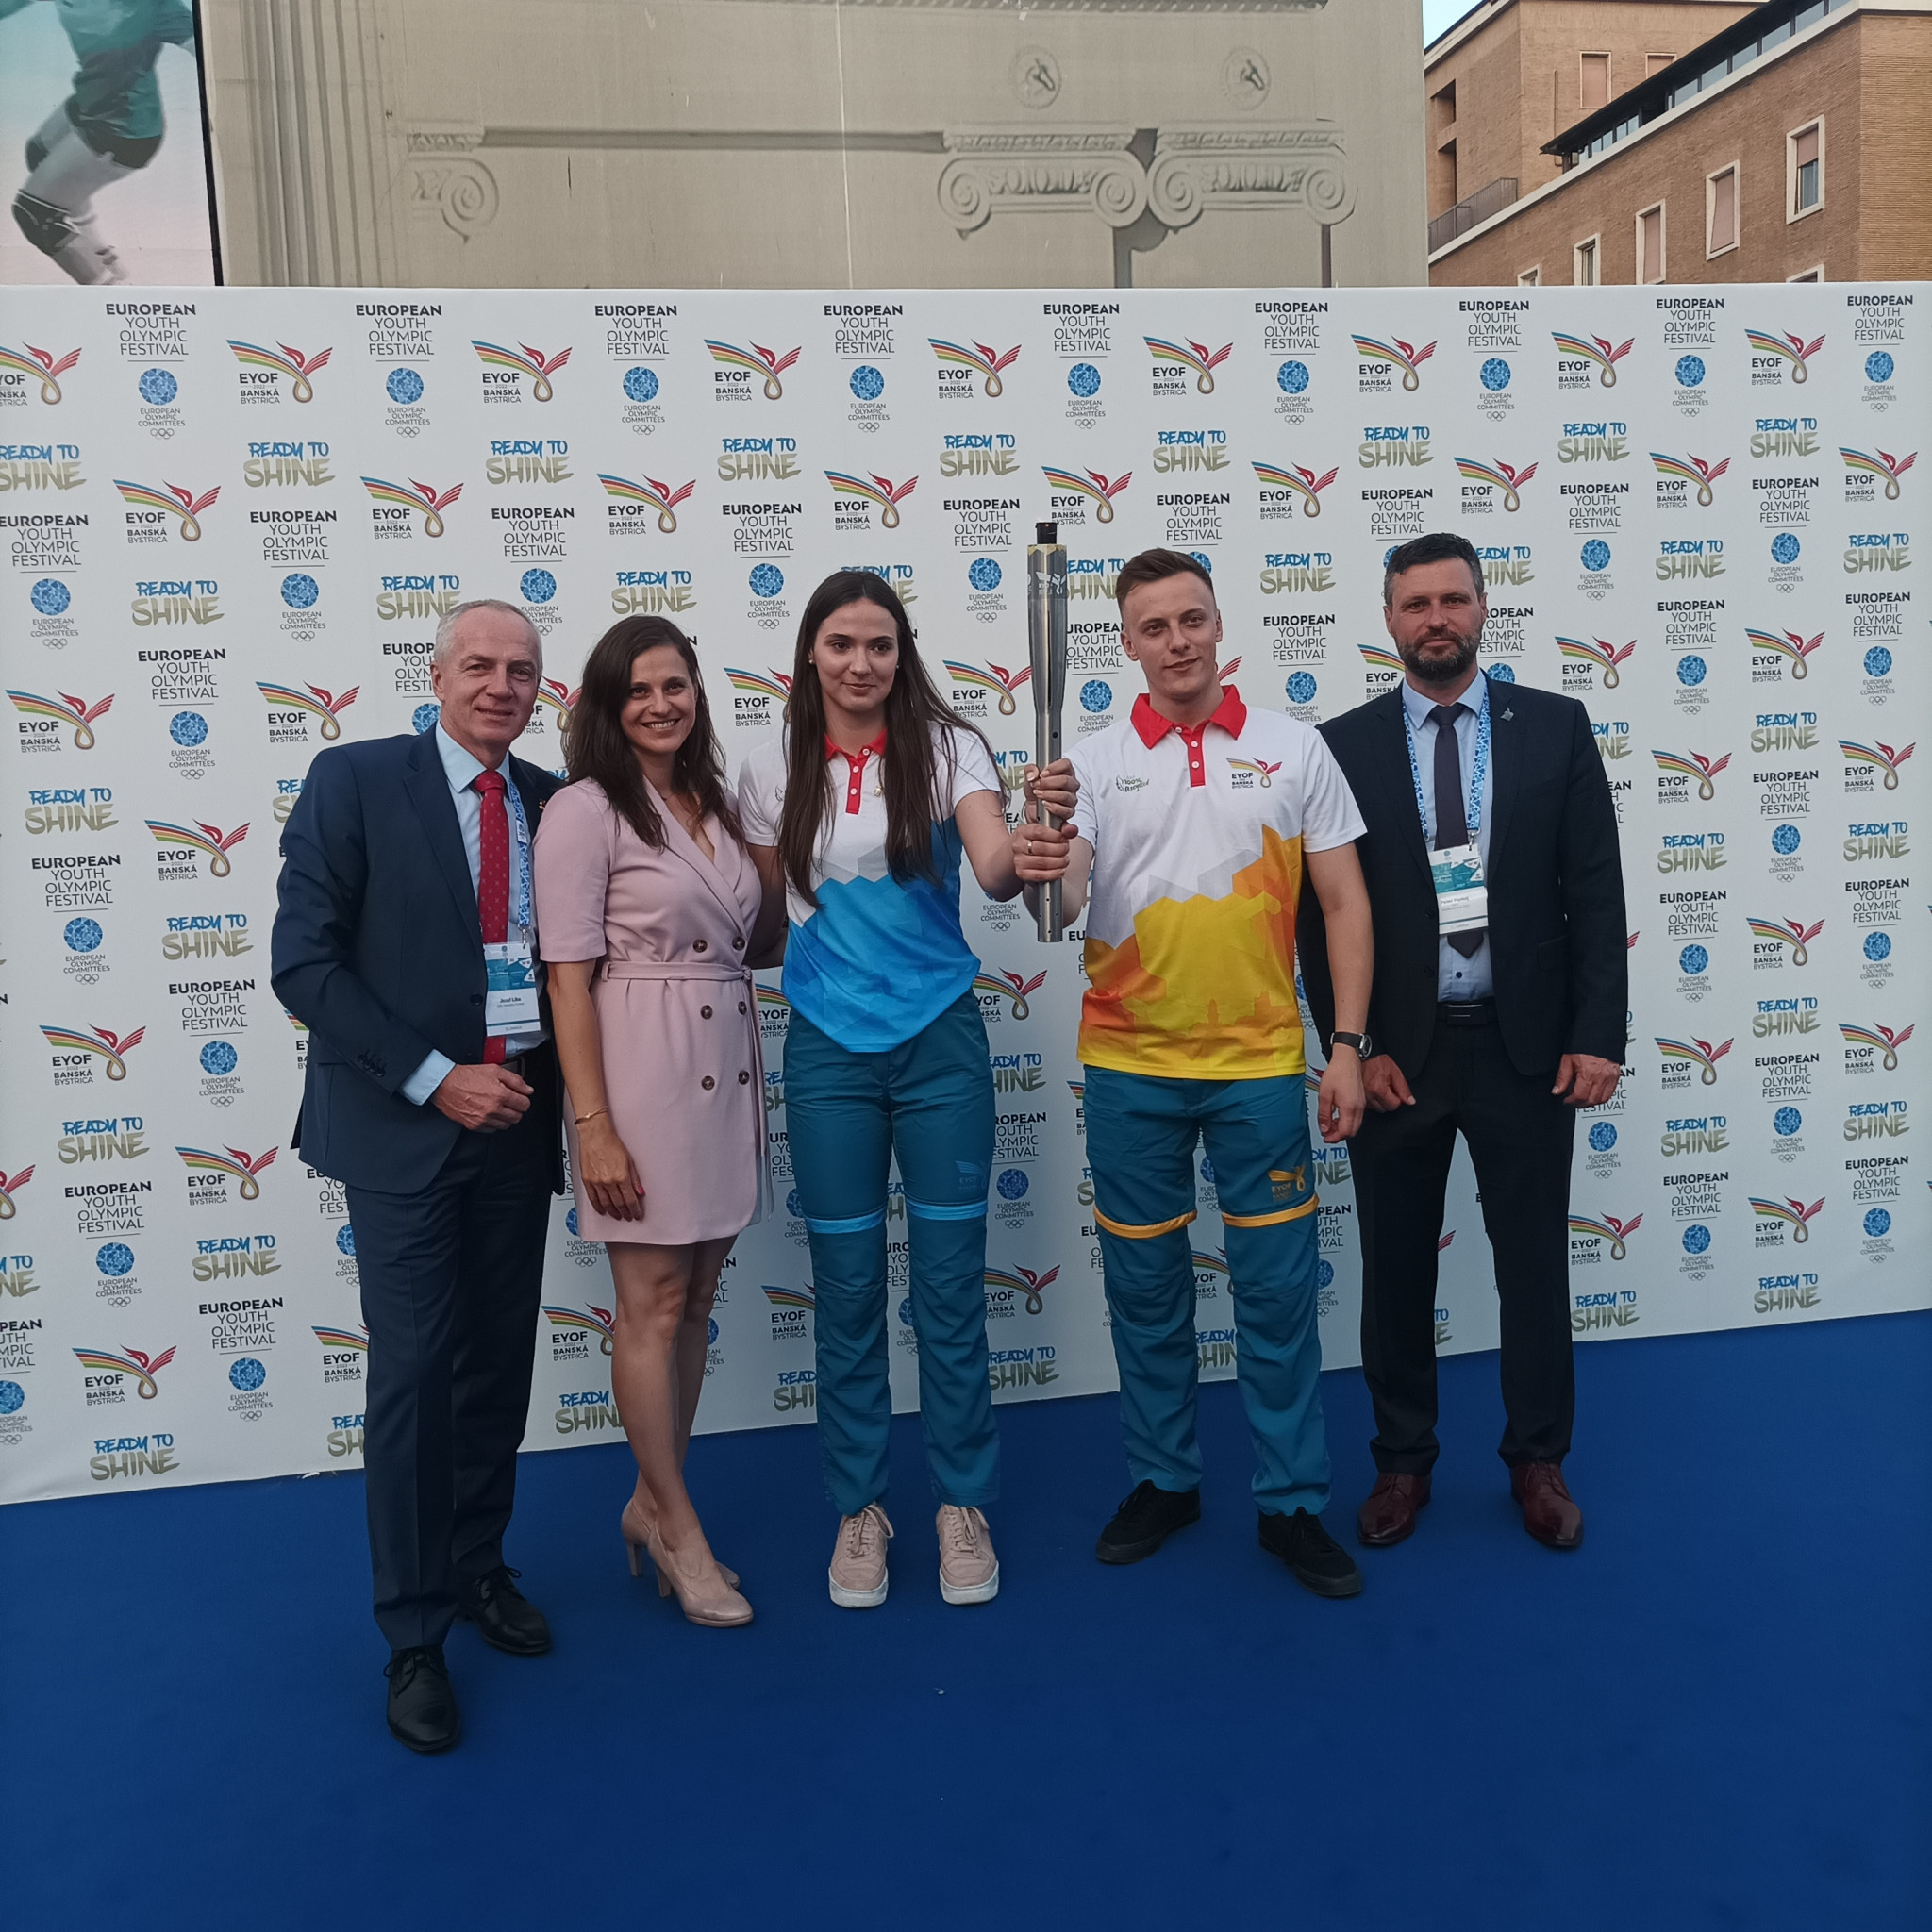 Danka Barteková, second from left, is scheduled to be one of the first Torchbearers when the Flame reaches Slovakia tomorrow ©ITG